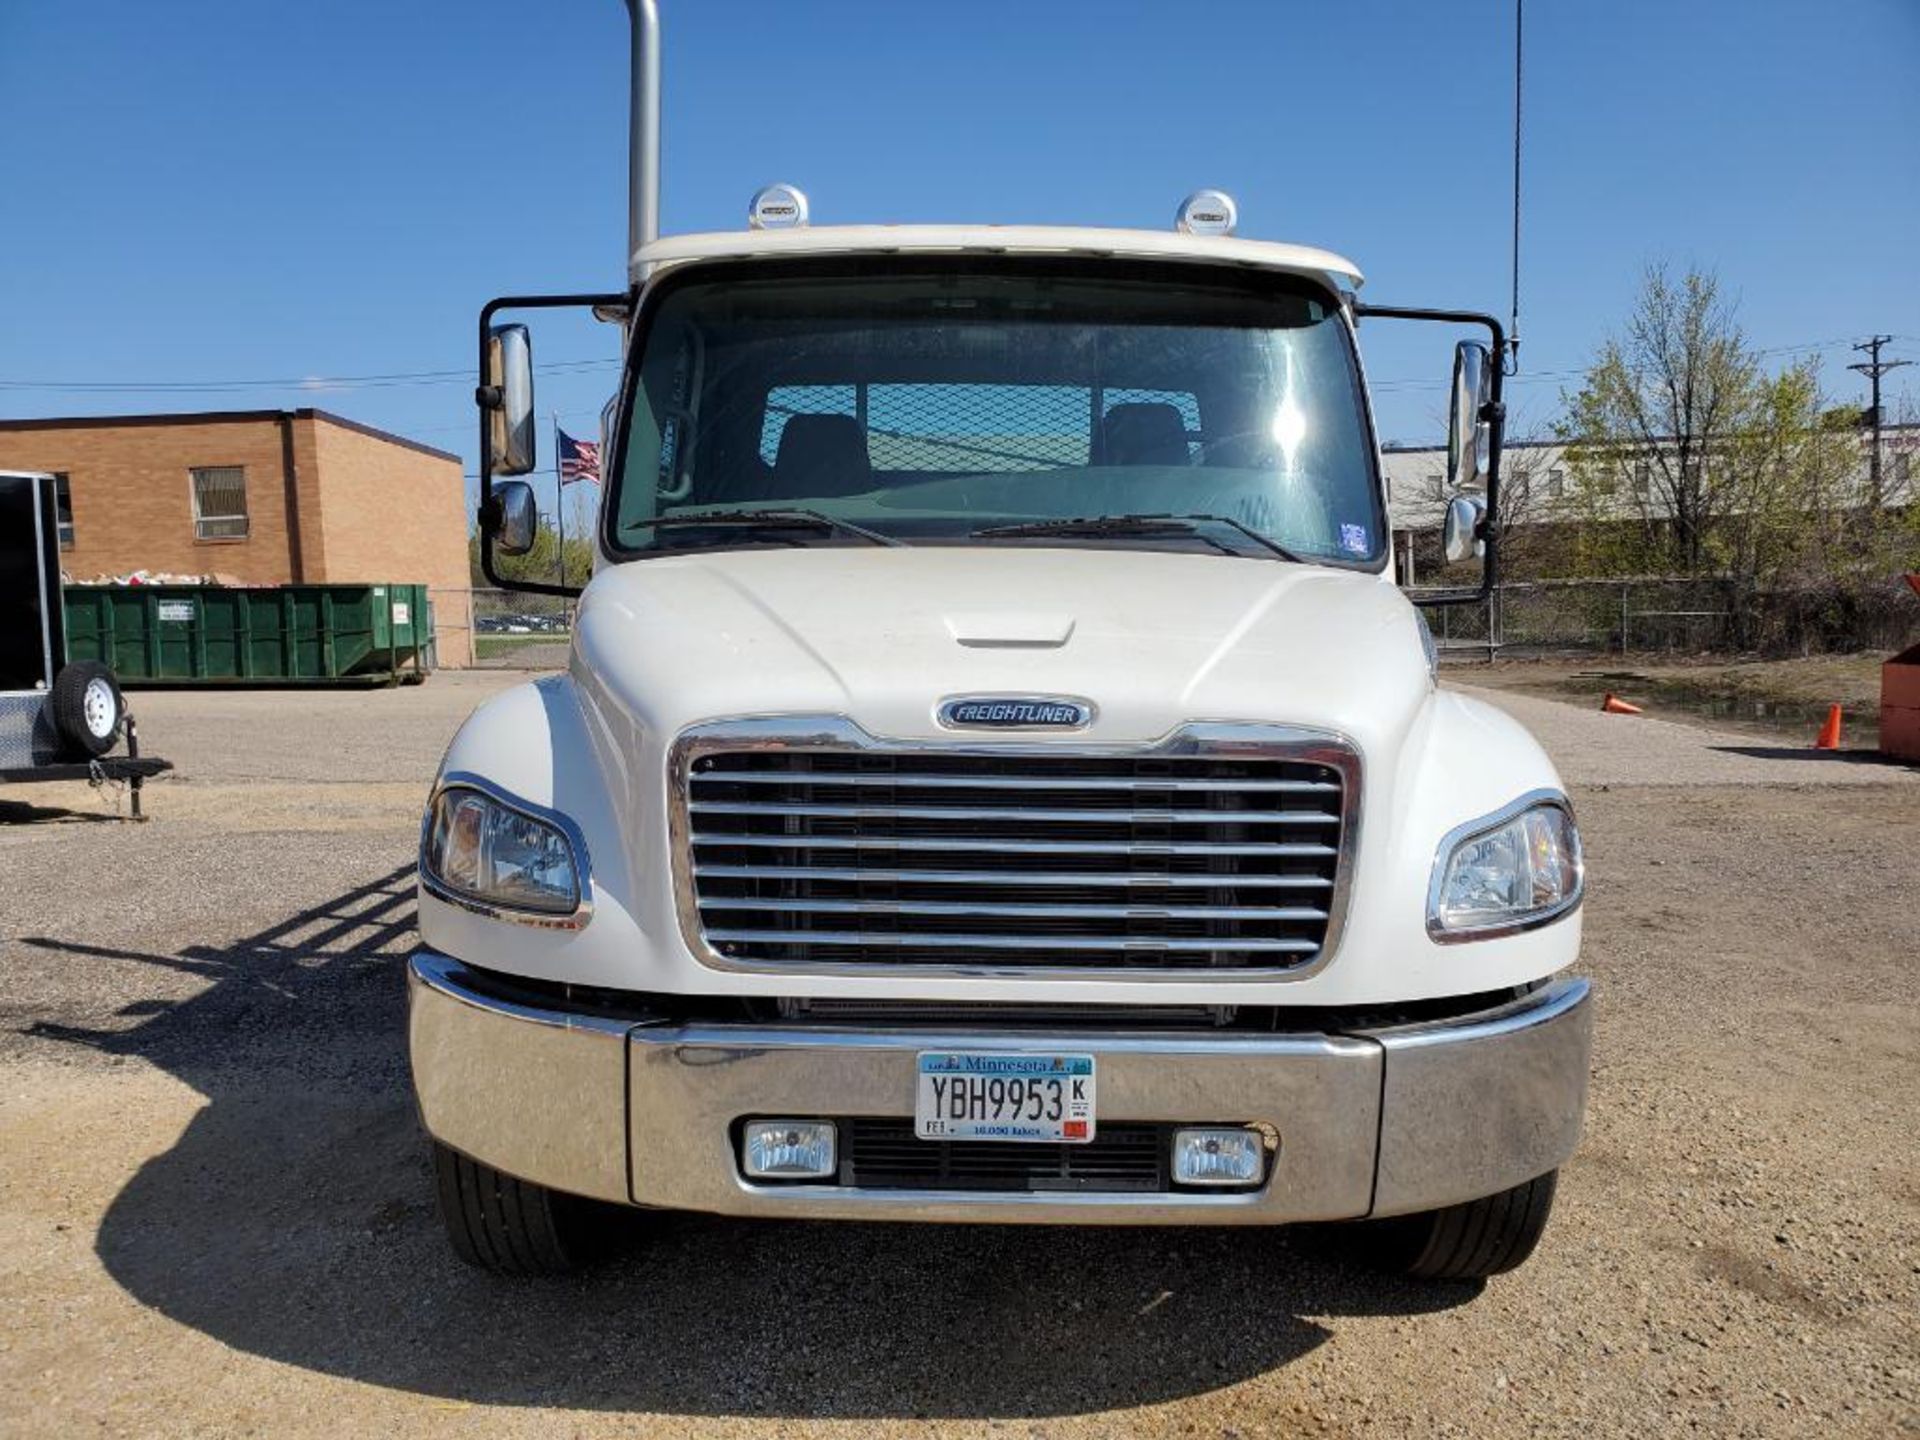 NOVEMBER 2012 FREIGHTLINER BUSINESS CLASS M2 STAKE BED TRUCK, 88,207.9 MILES, VIN 1FVACXDT5CDBL6833 - Image 9 of 20